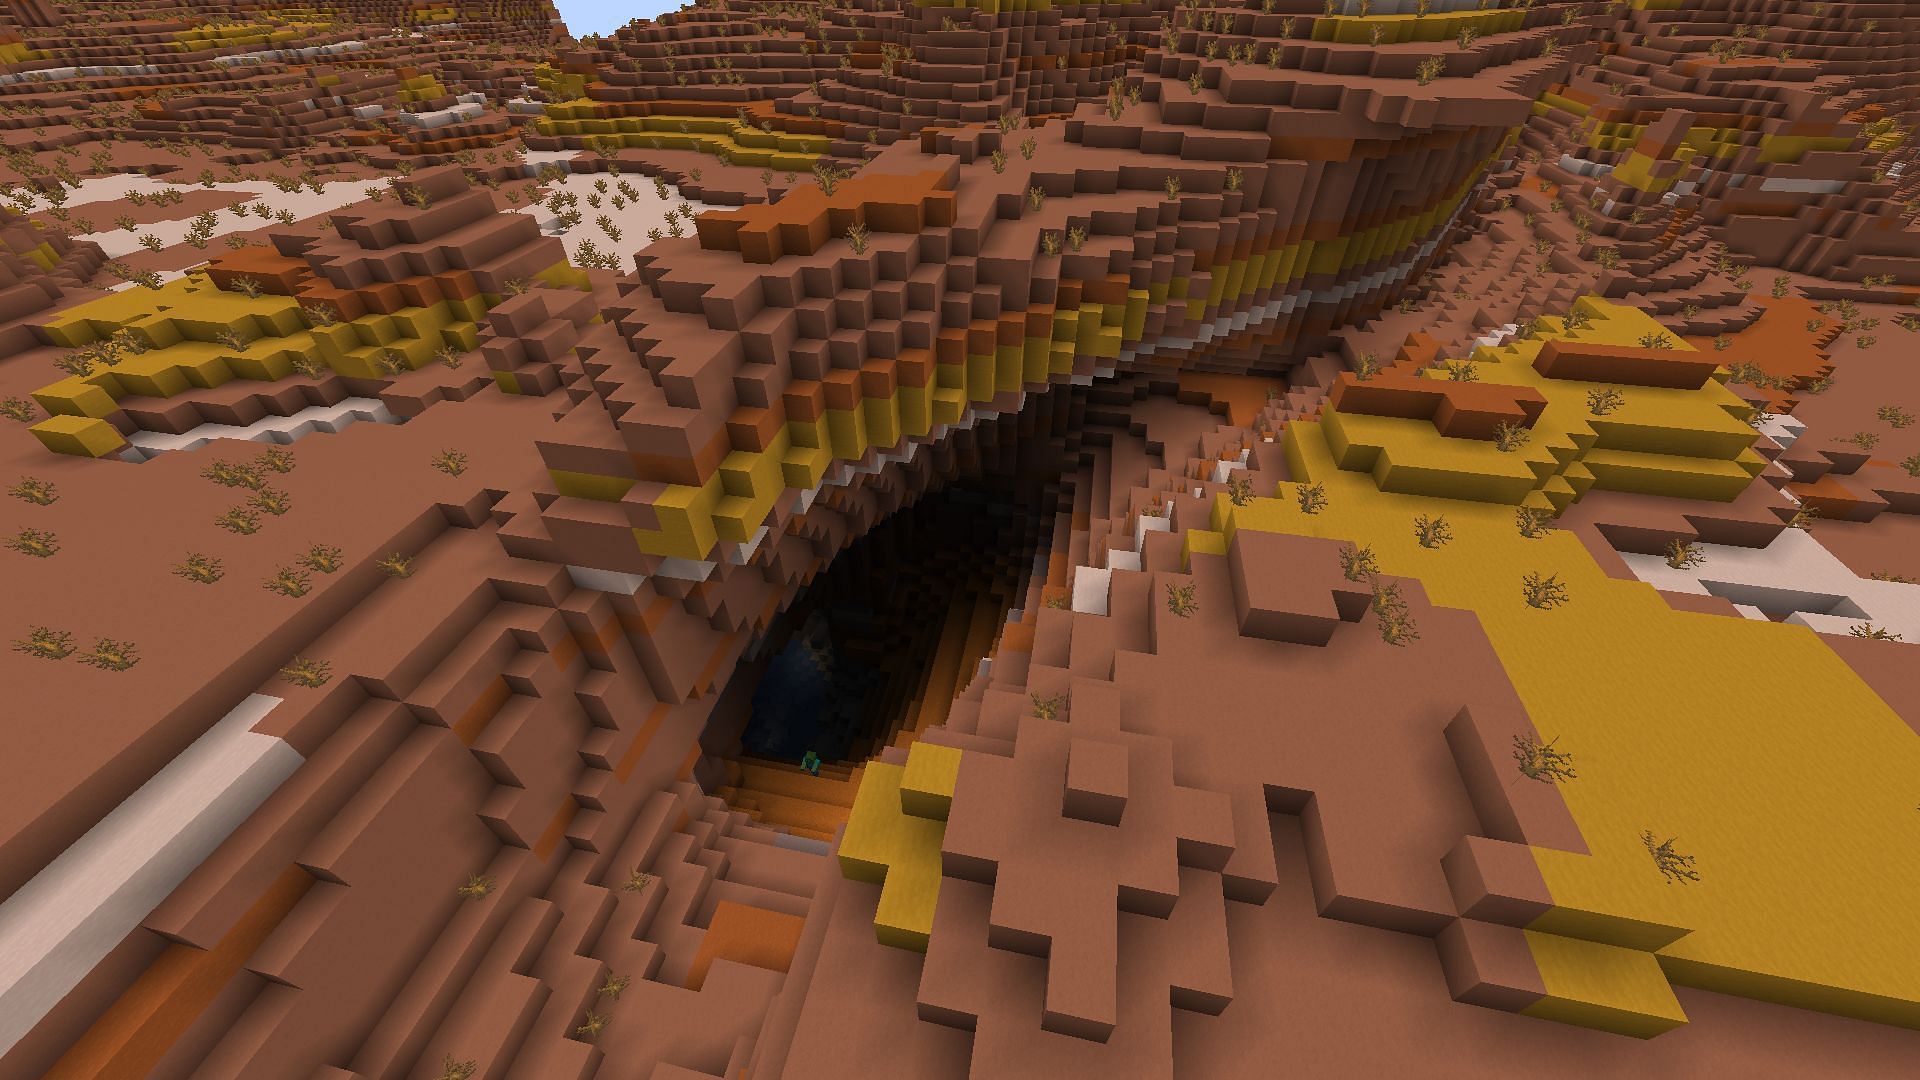 An example of a ravine in a badlands biome (Image via Minecraft)